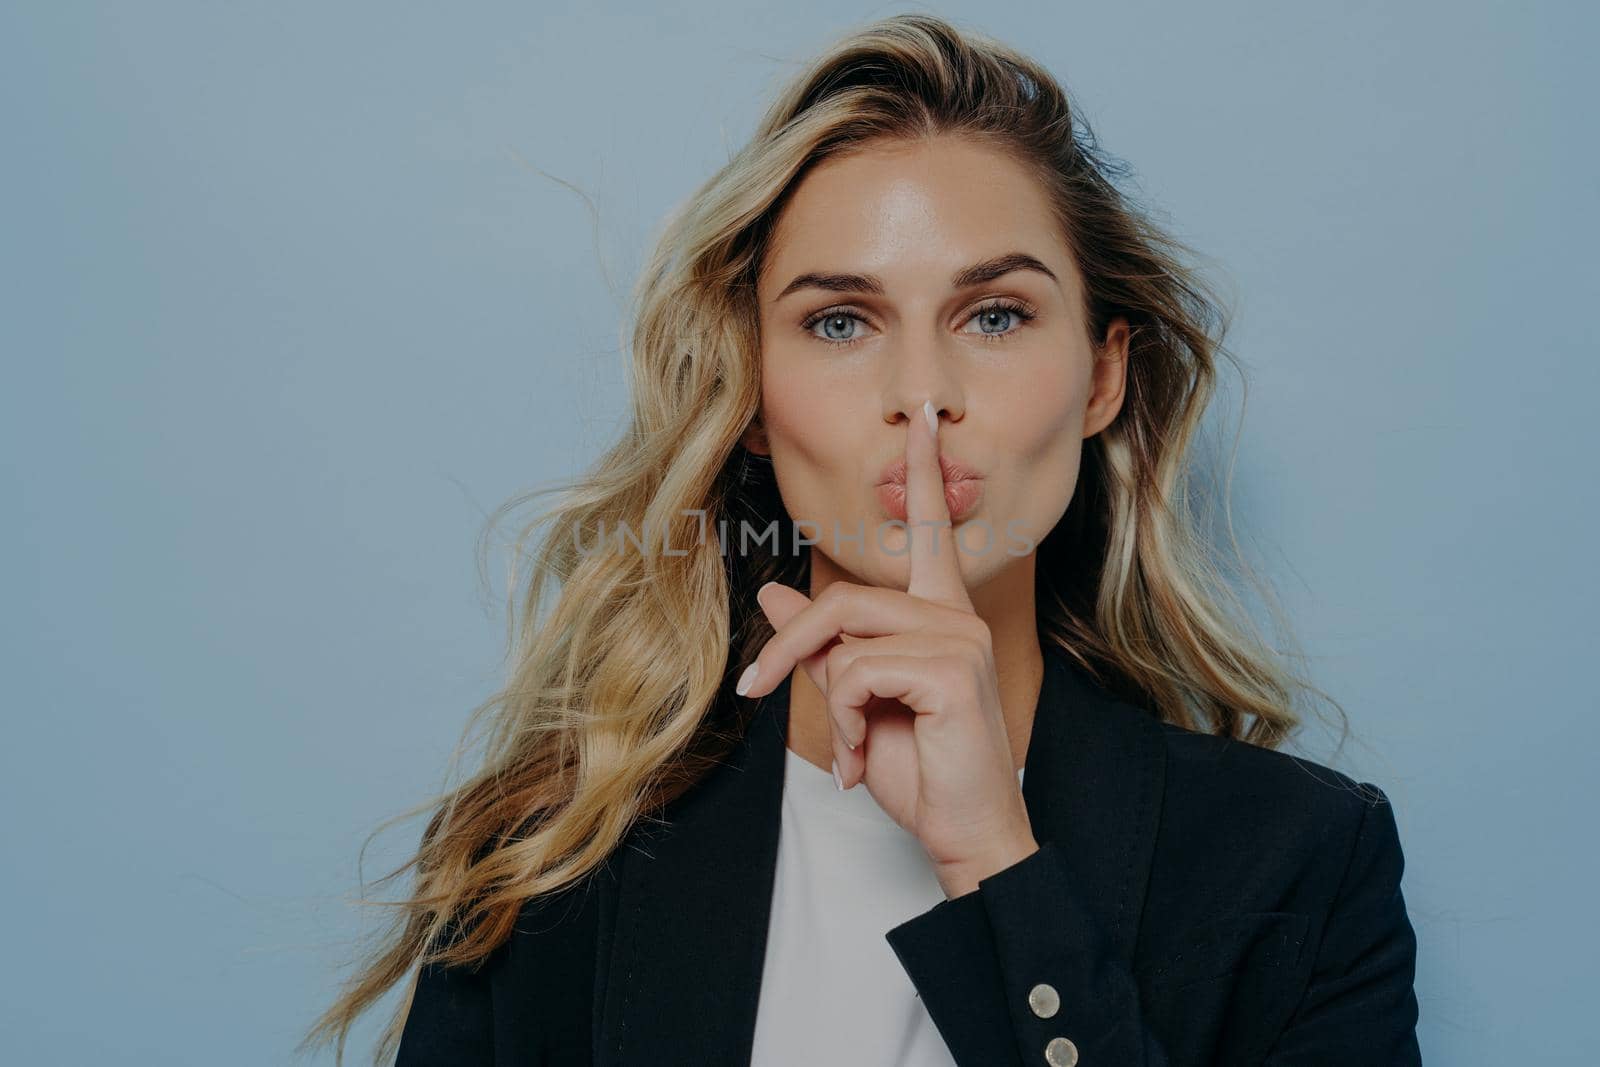 Blonde woman making shush gesture with her hand by vkstock